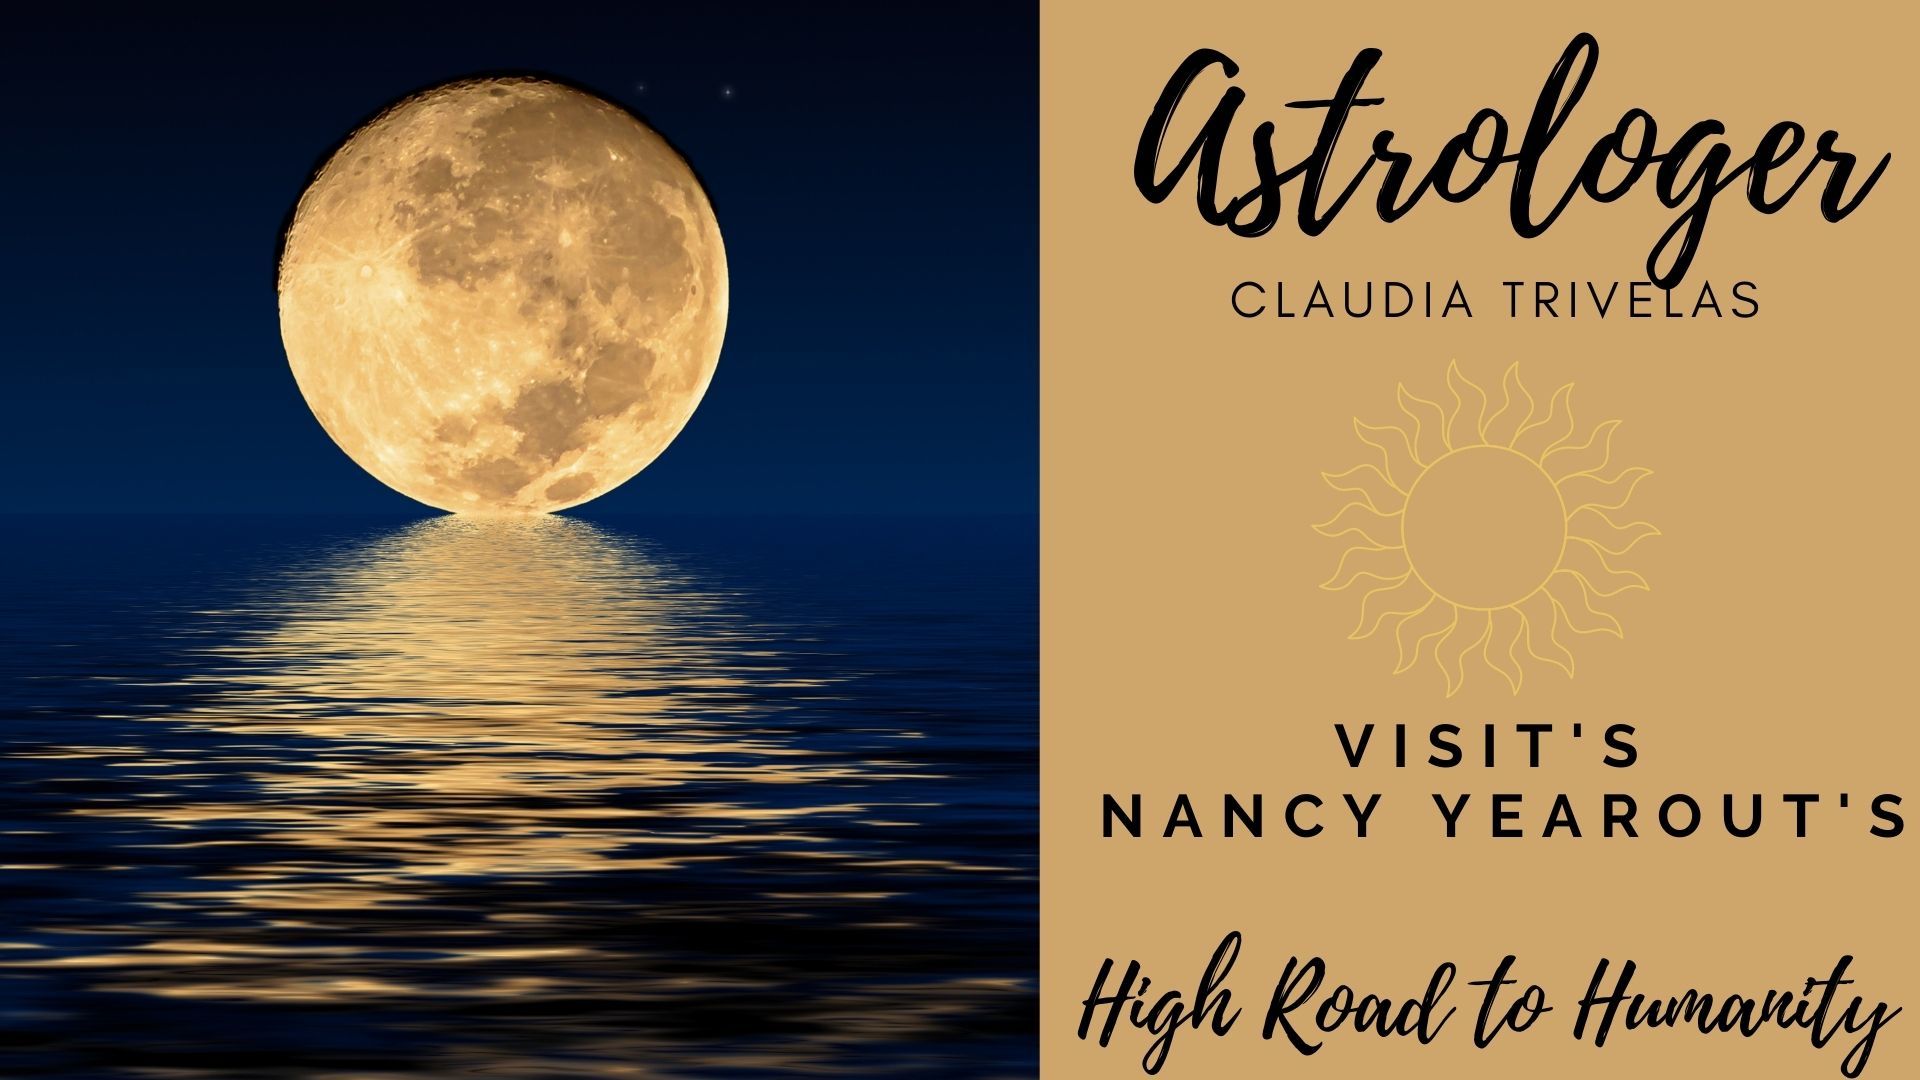 Predictions for March with Astrologer Claudia Trivelas on Nancy Yearout's High Road to Humanity